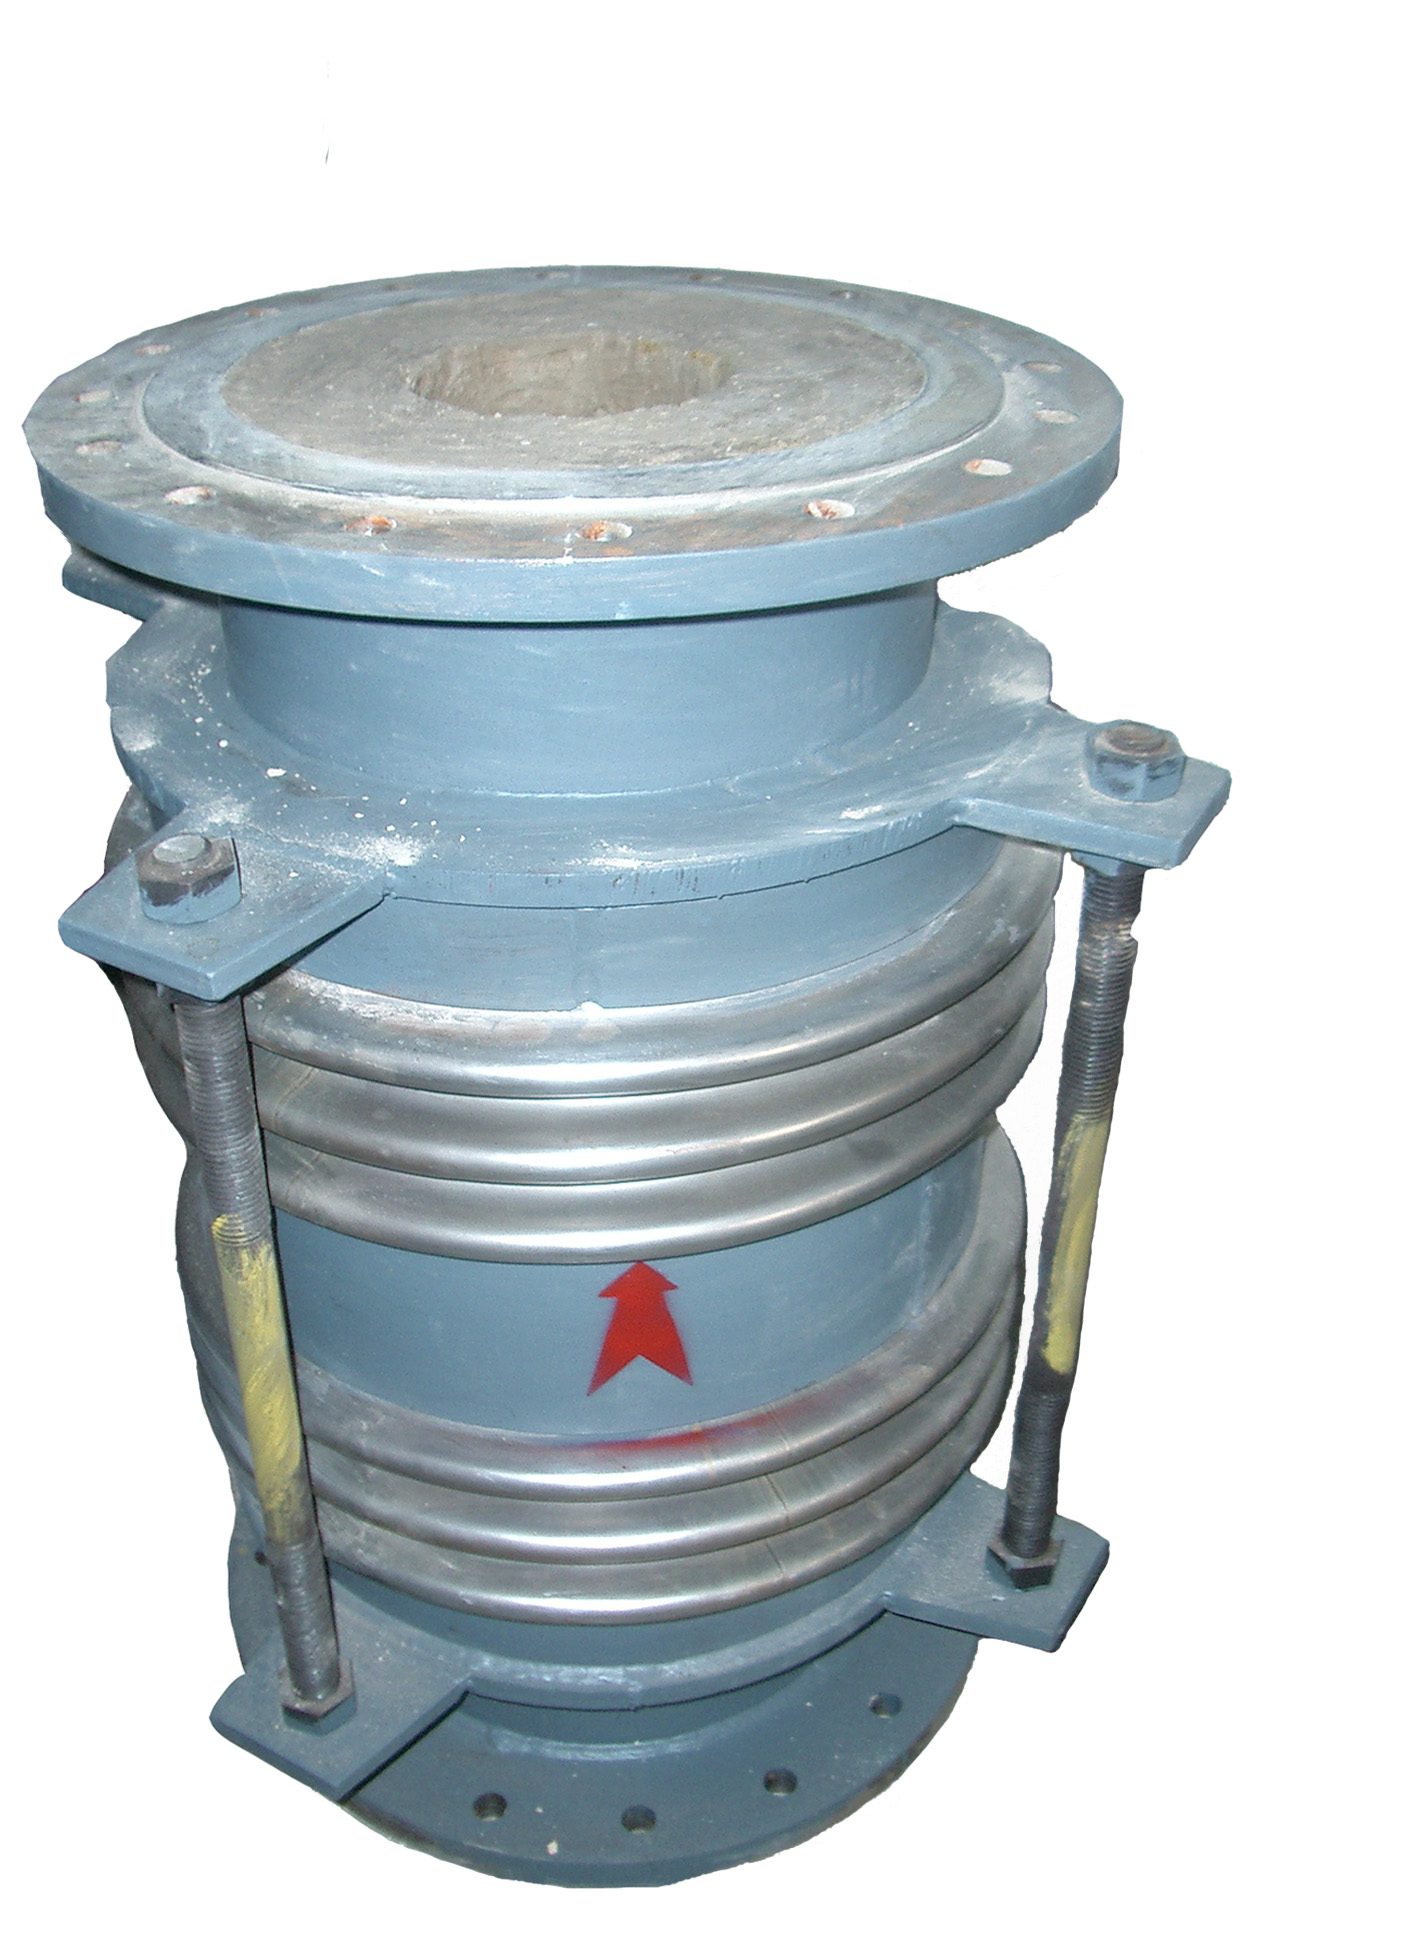 Double High-temperature Resistant Tie-rod Bellows Expansion Joint